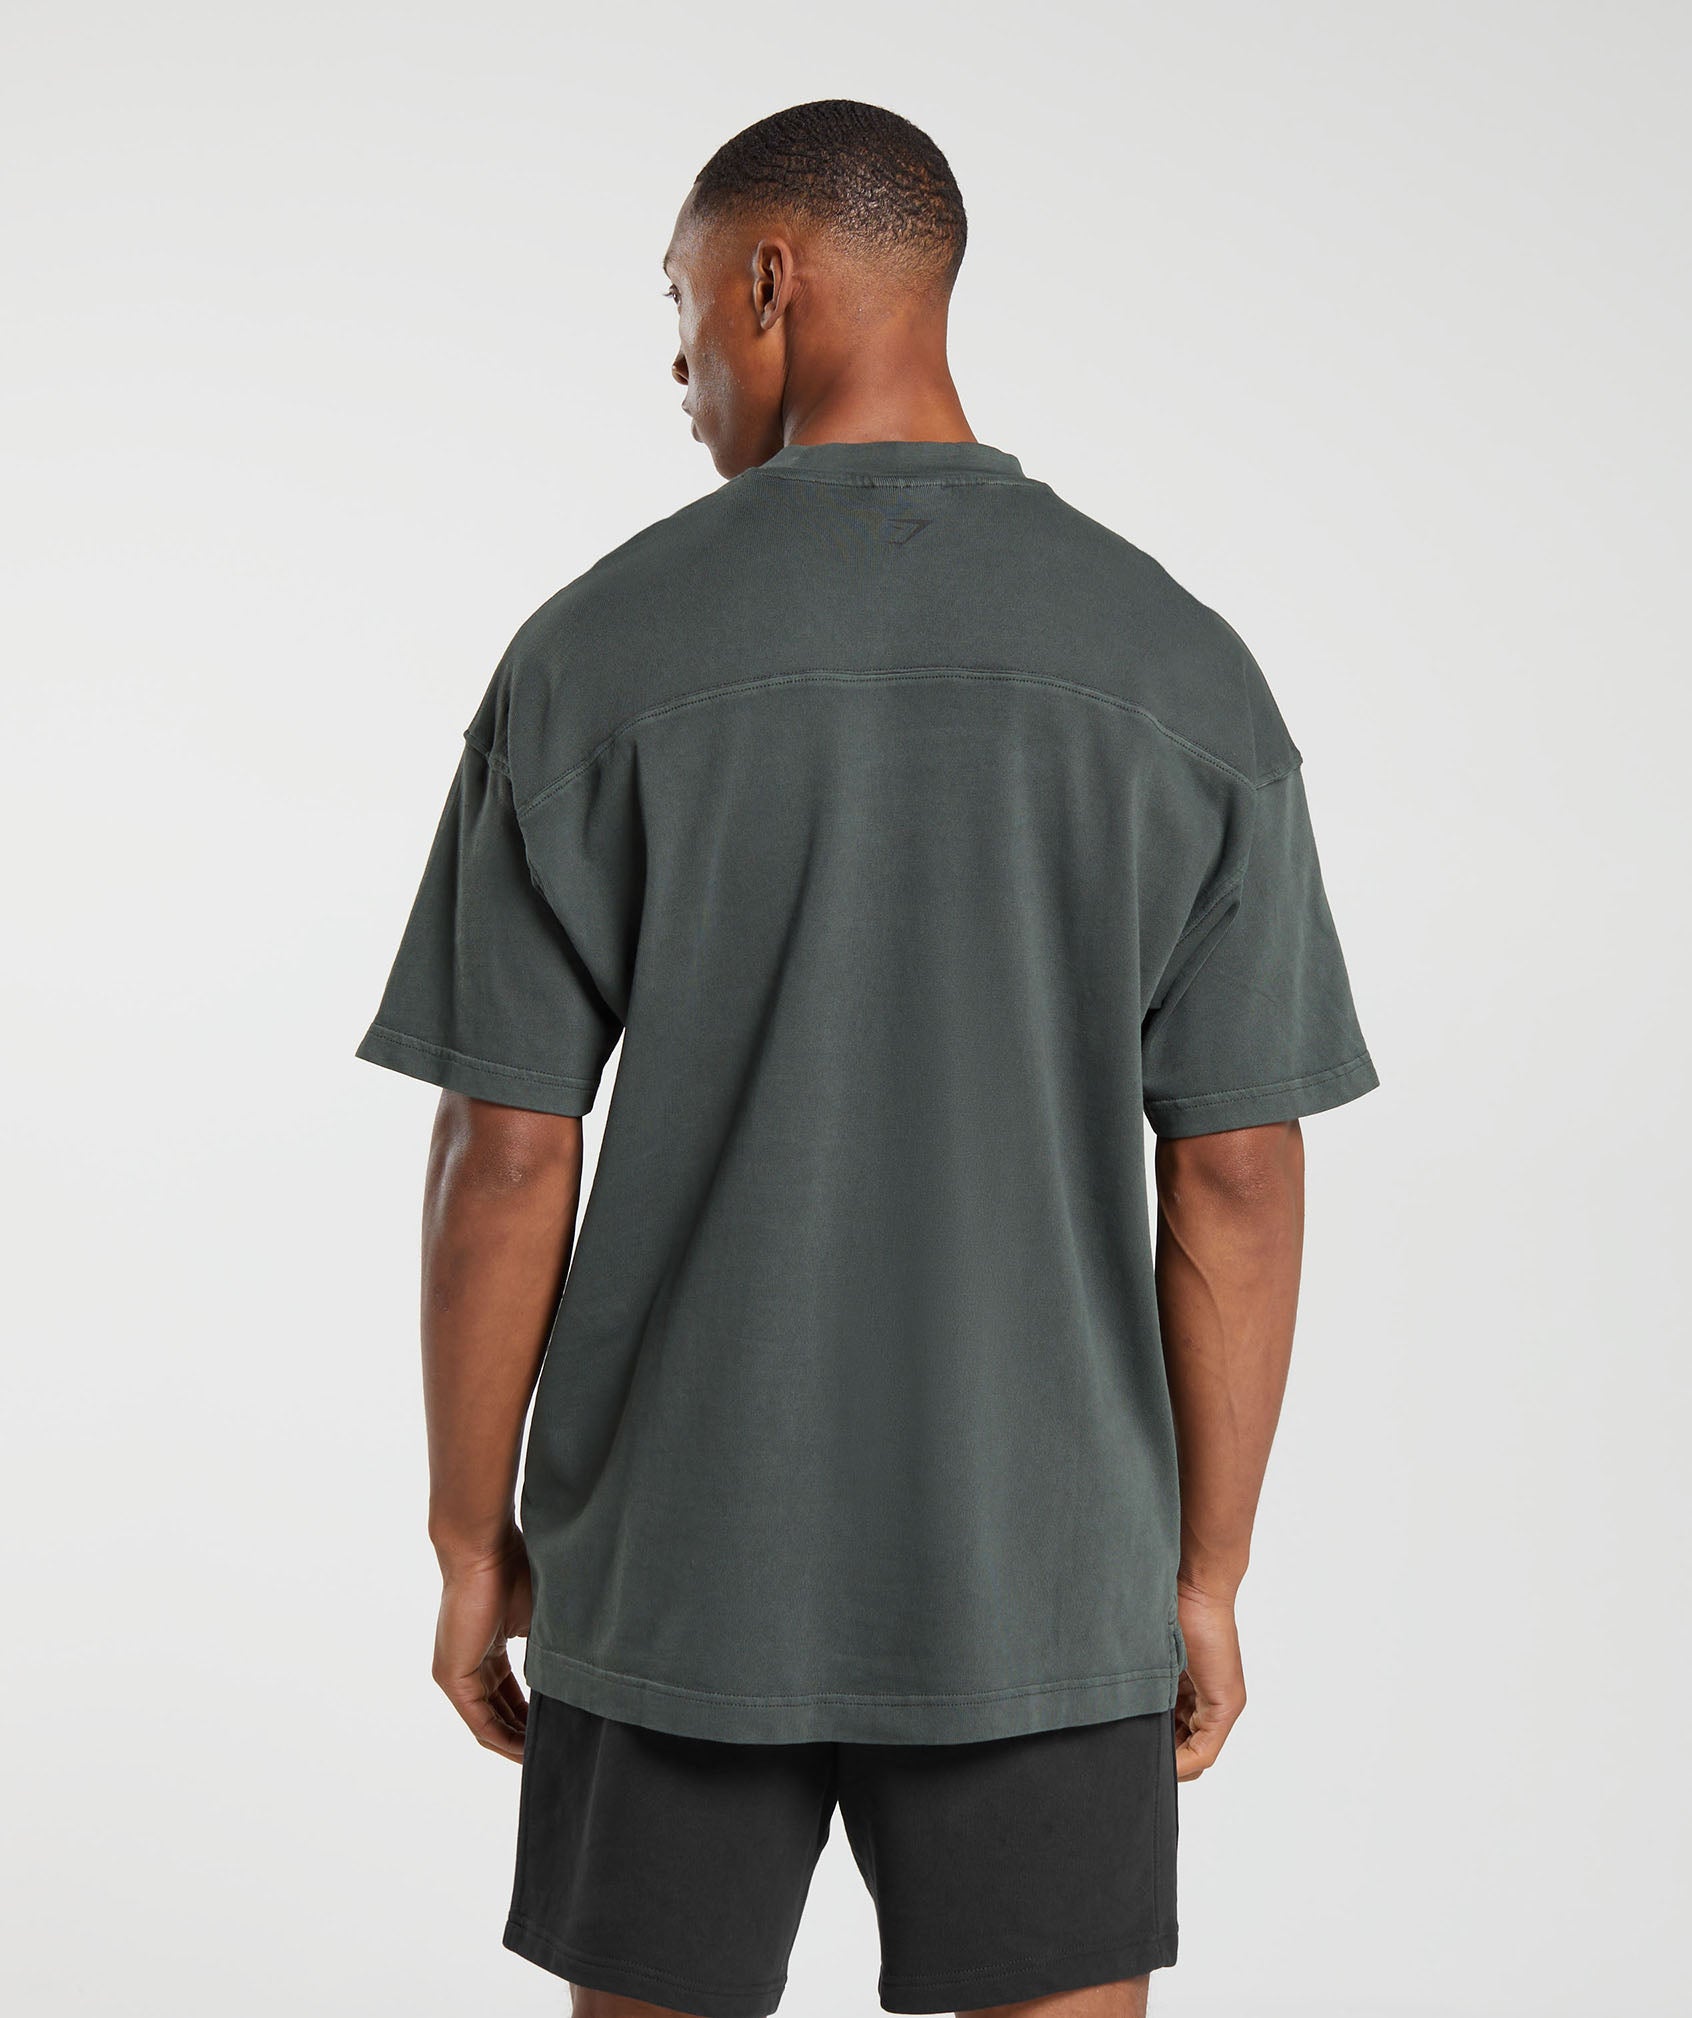 Heavyweight T-Shirt in Deep Olive Green - view 2